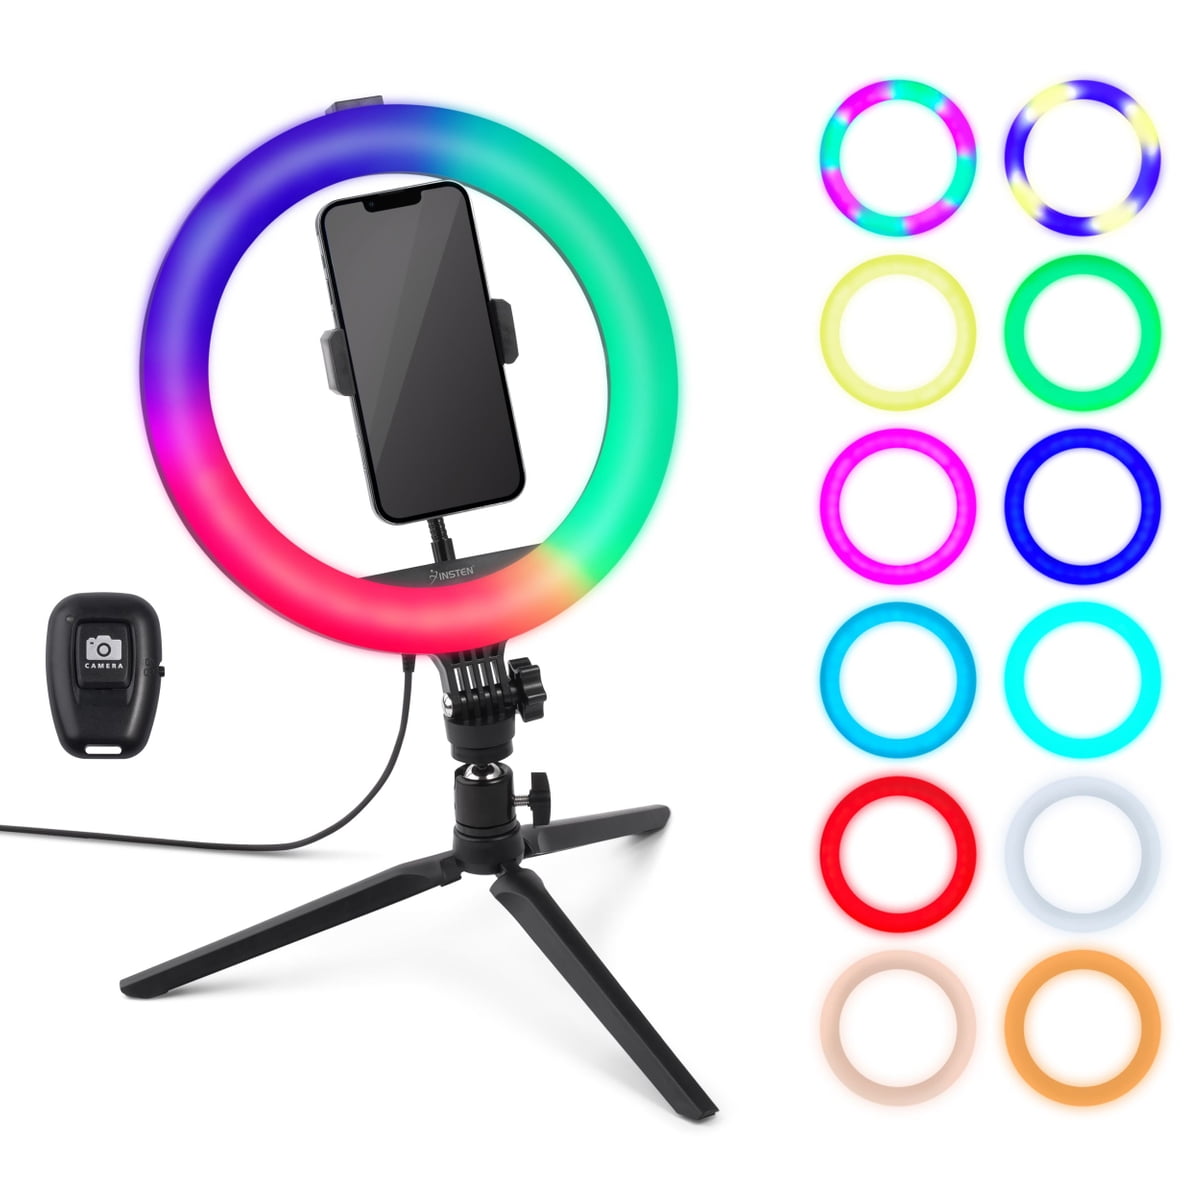 Compatible with iPhone Bluetooth Remote,Dimmable LED Beauty Desktop Circle Light for Makeup/Live Stream/TikTok/YouTube Video 10 Selfie Ring Light with Stand & Phone Holders Android Phones 